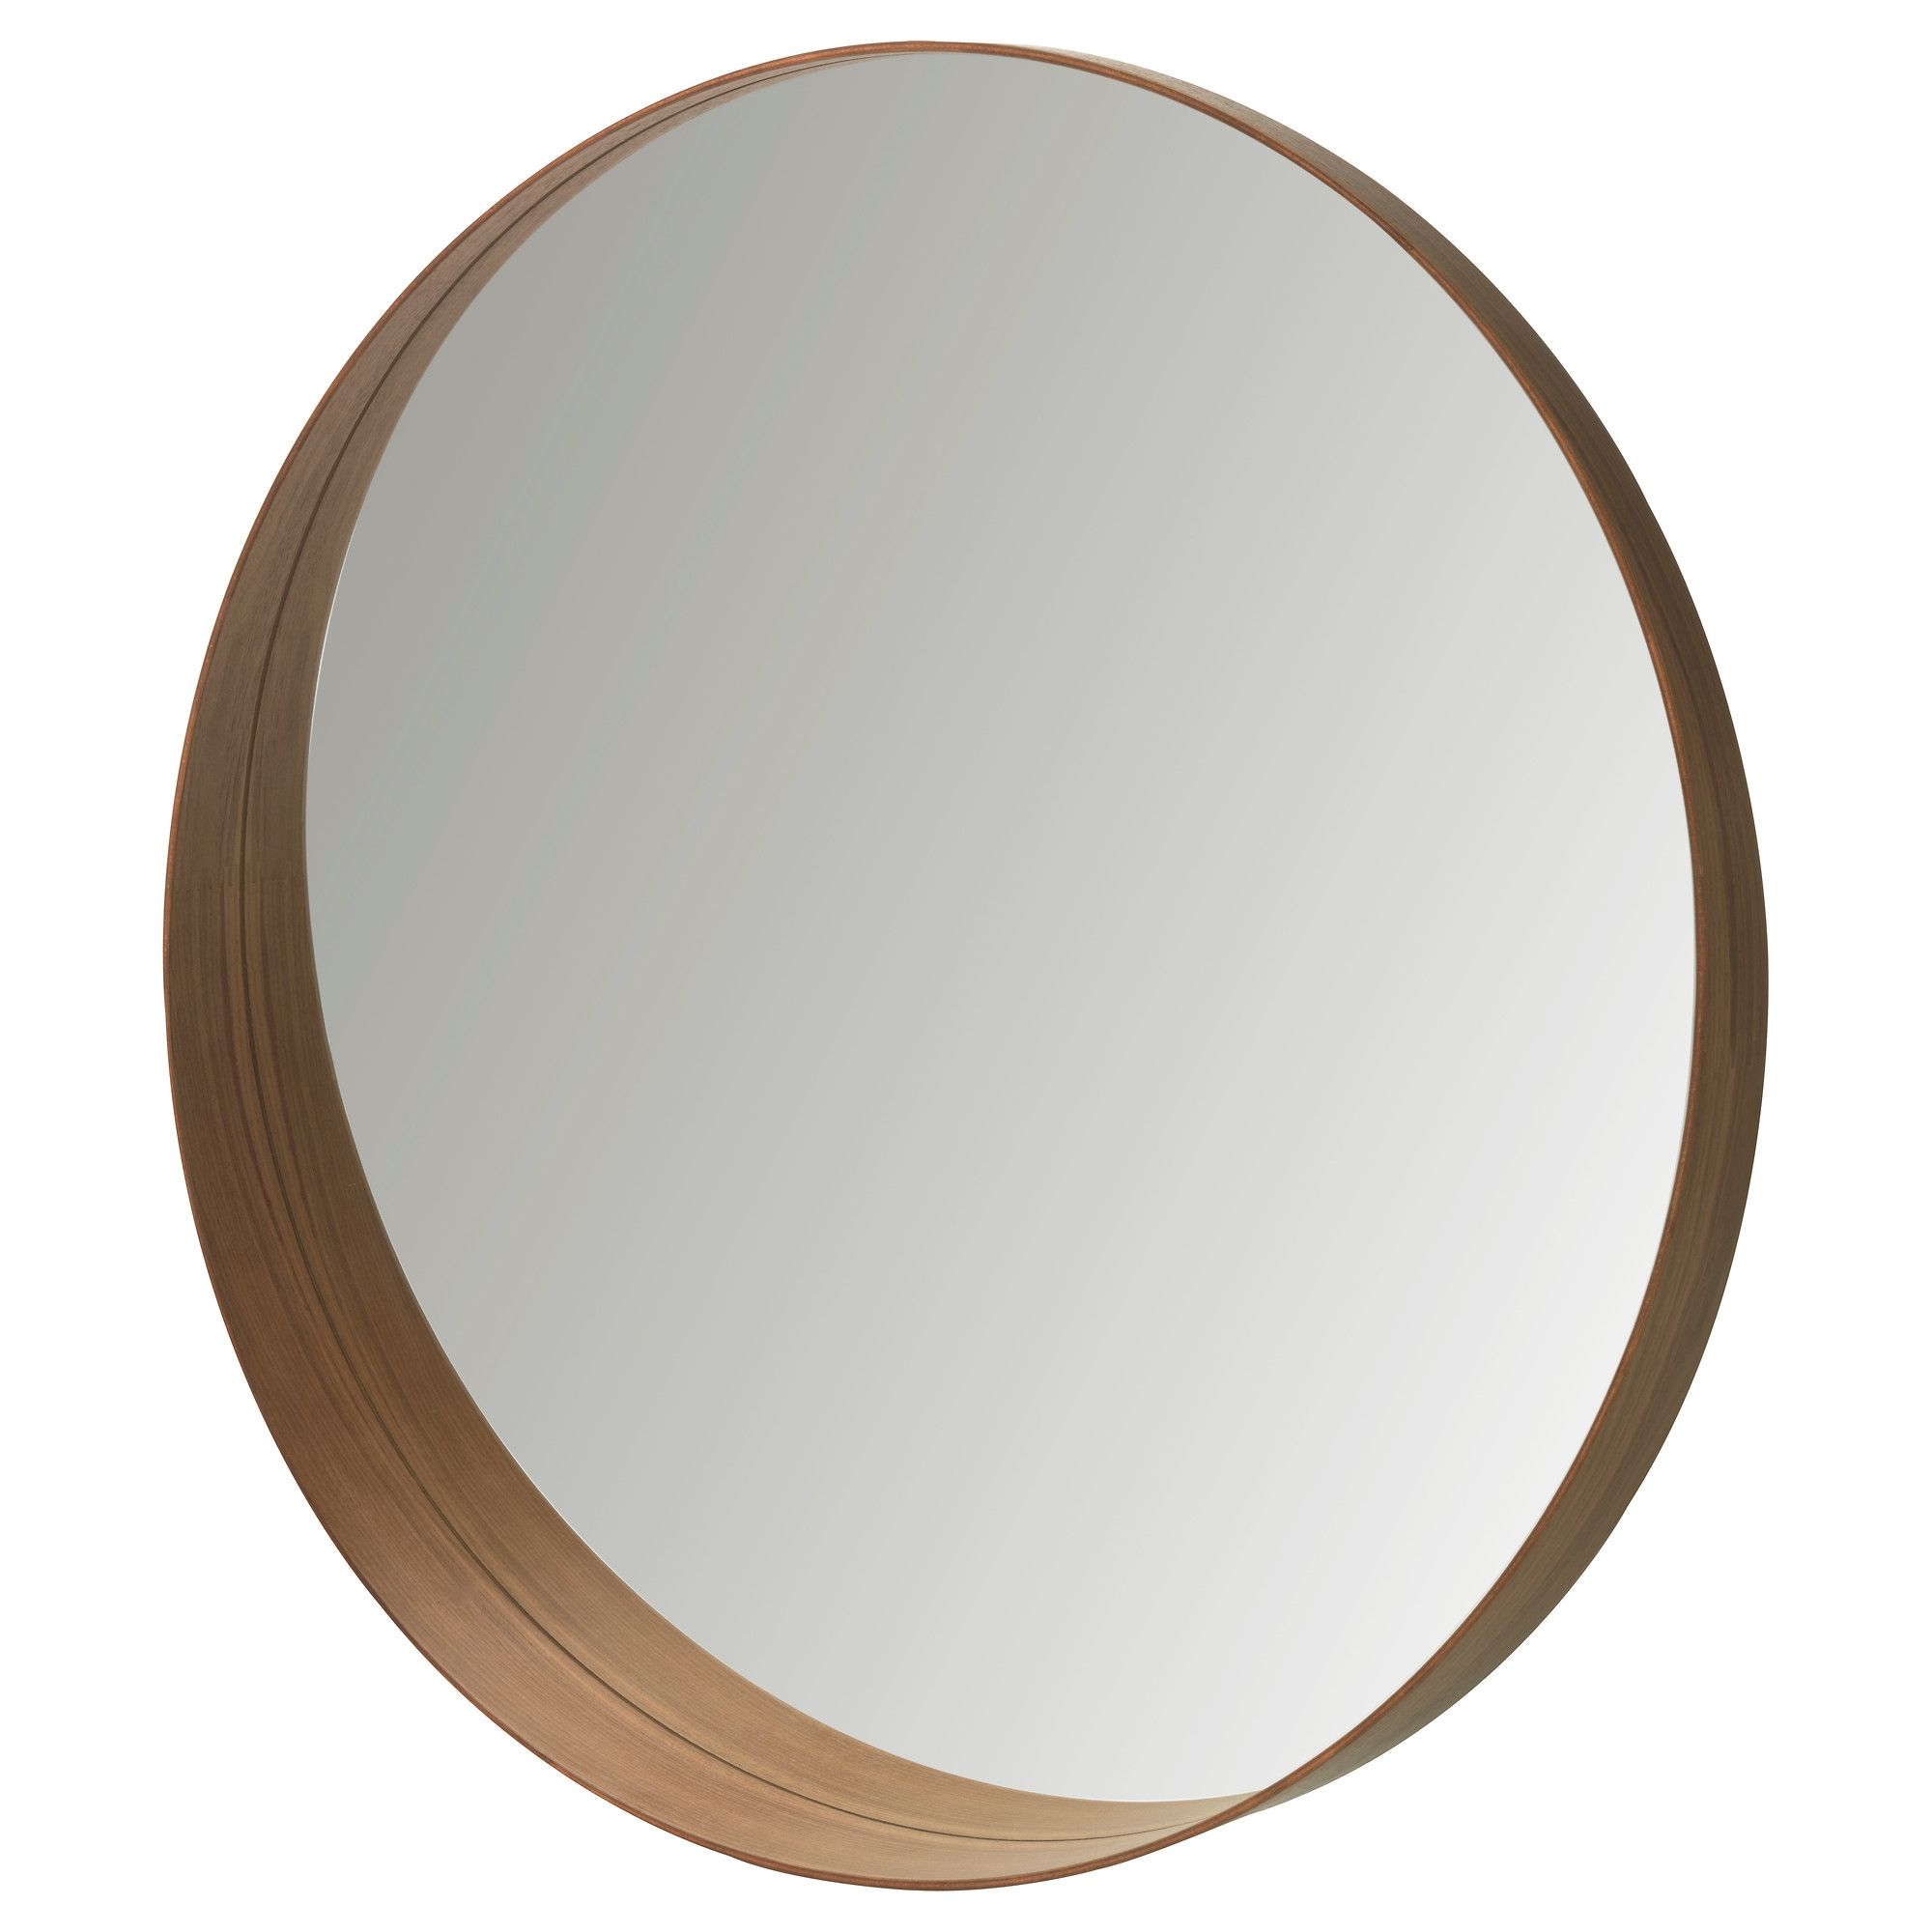 15 The Best Large Round Mirrors for Sale